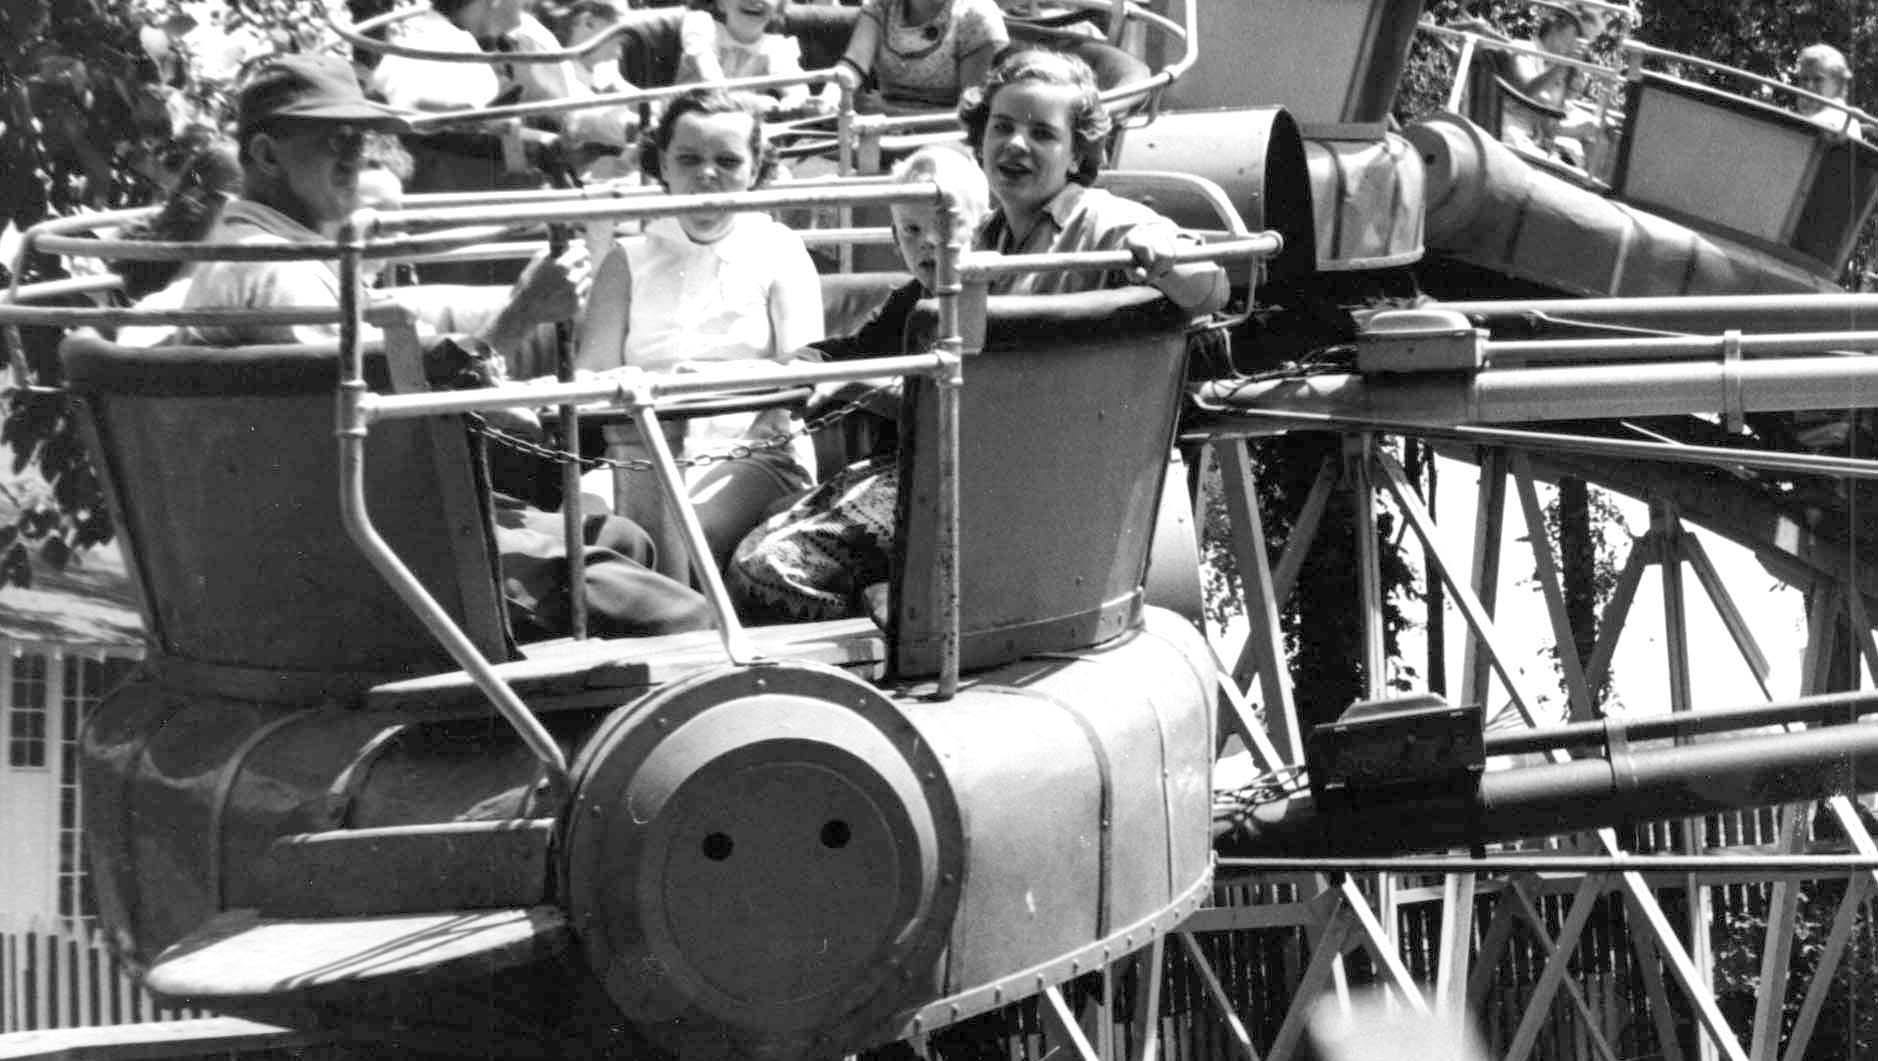 Day-trippers enjoy a spinning amusement park ride.